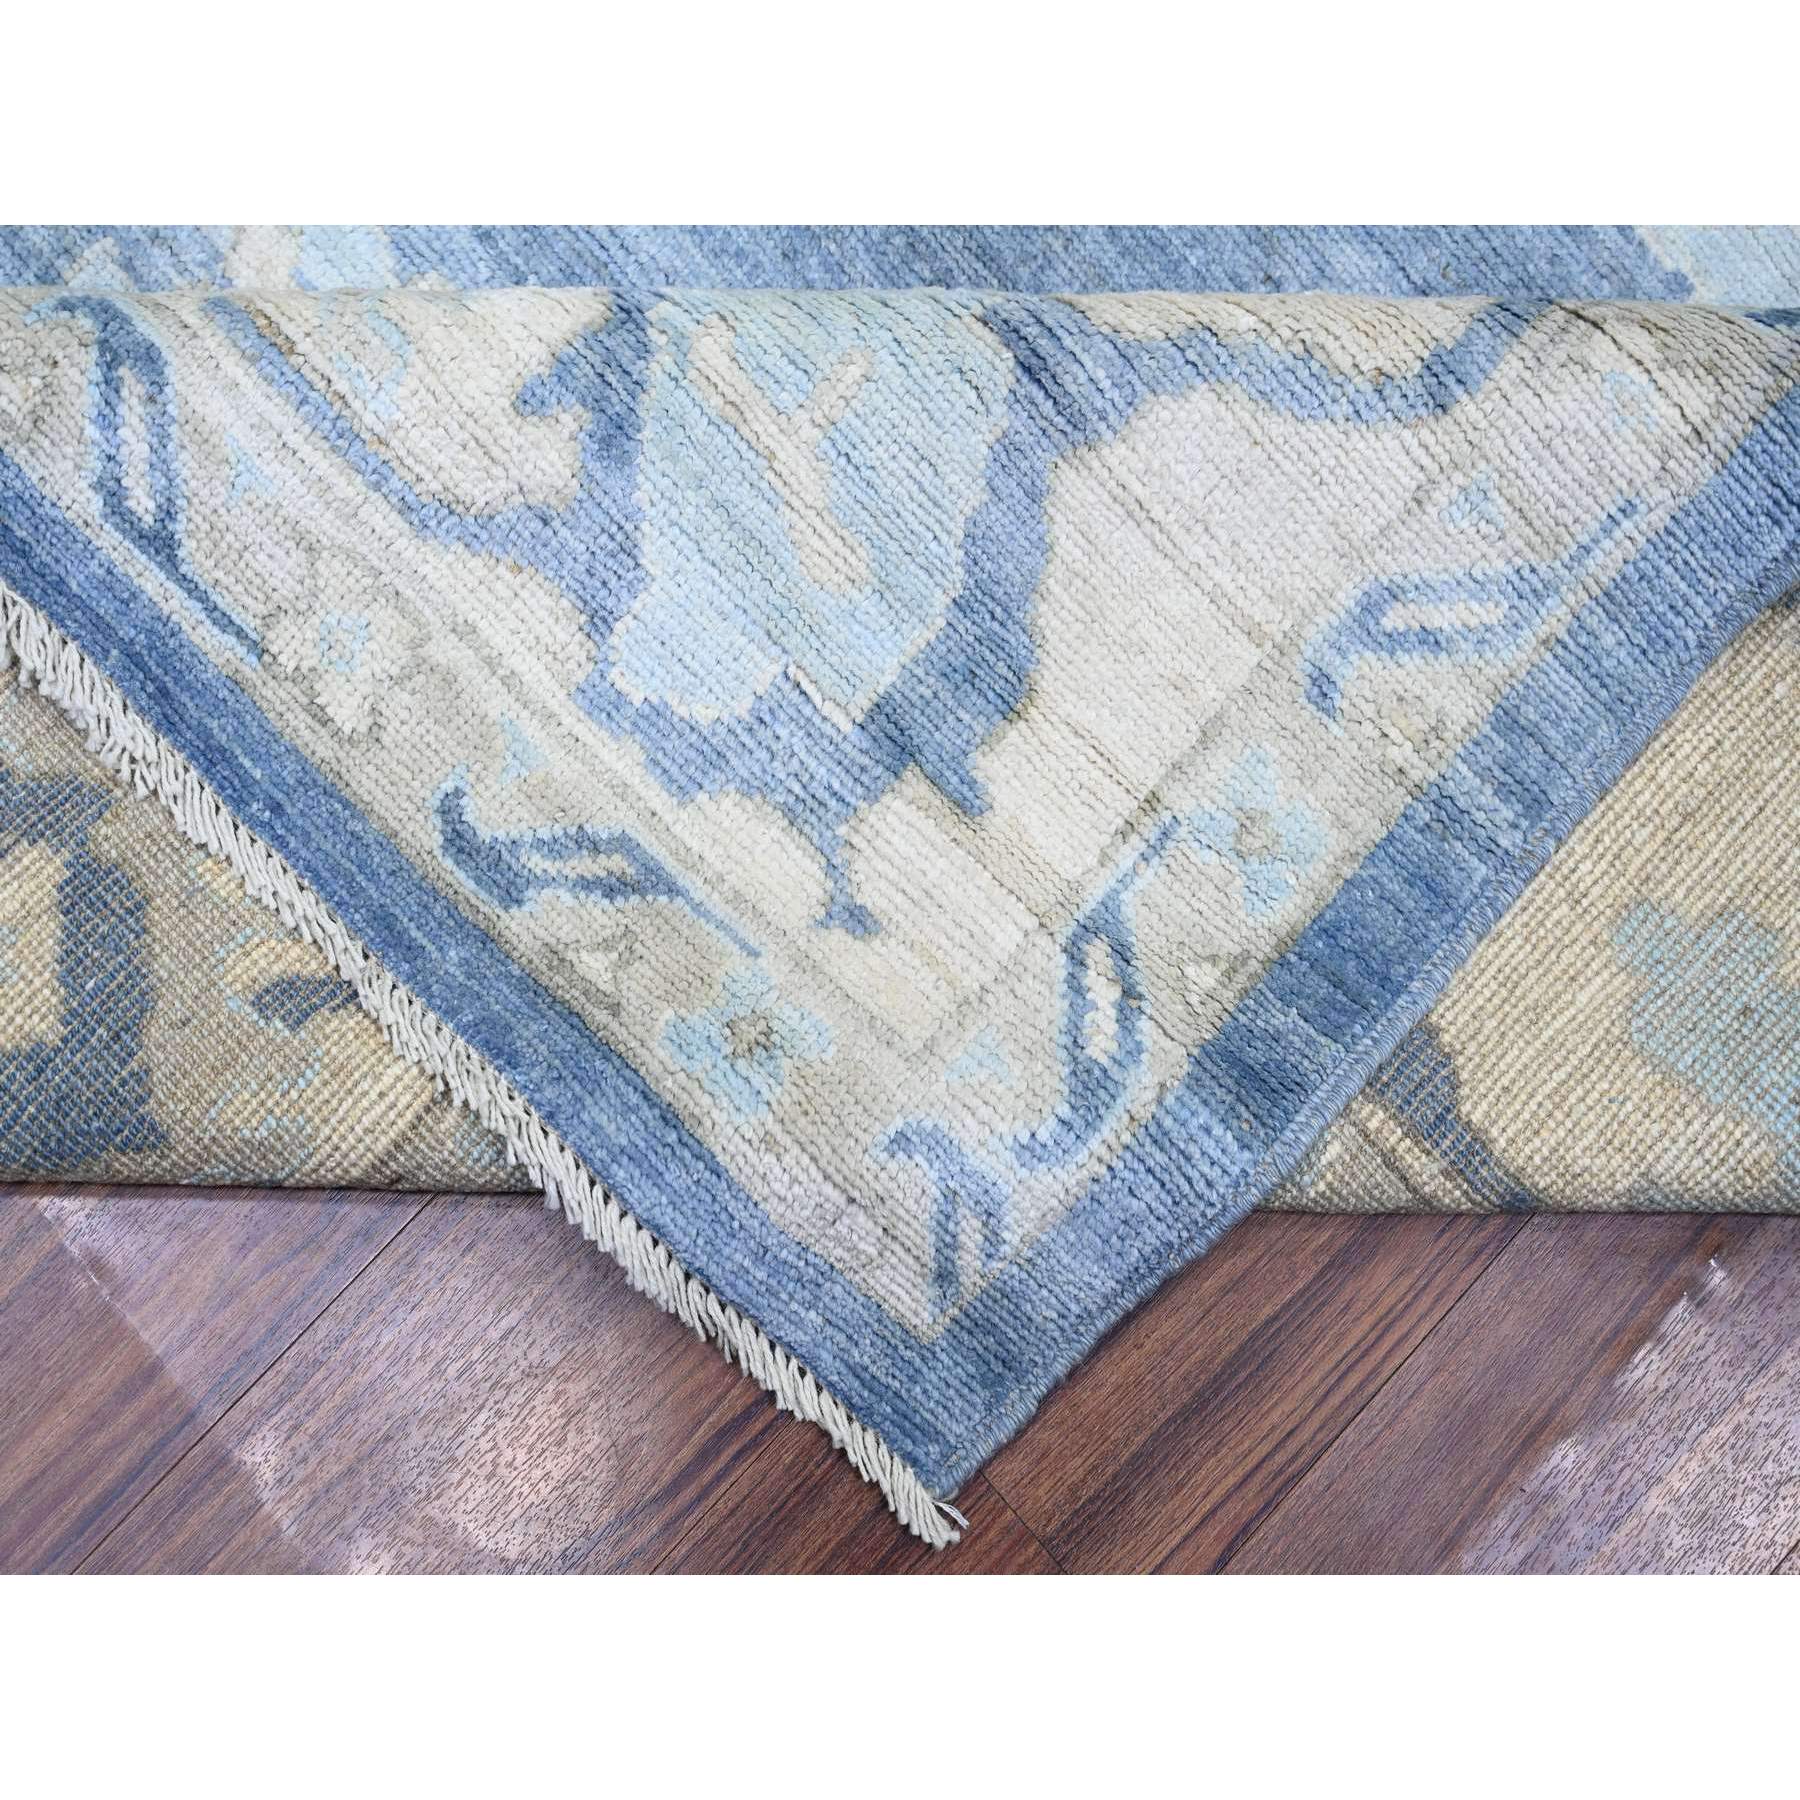 10'4"x13'8" Air Superiority Blue, Hand Woven Afghan Angora Oushak with Large Motifs, Vegetable Dyes 100% Wool, Oriental Rug 